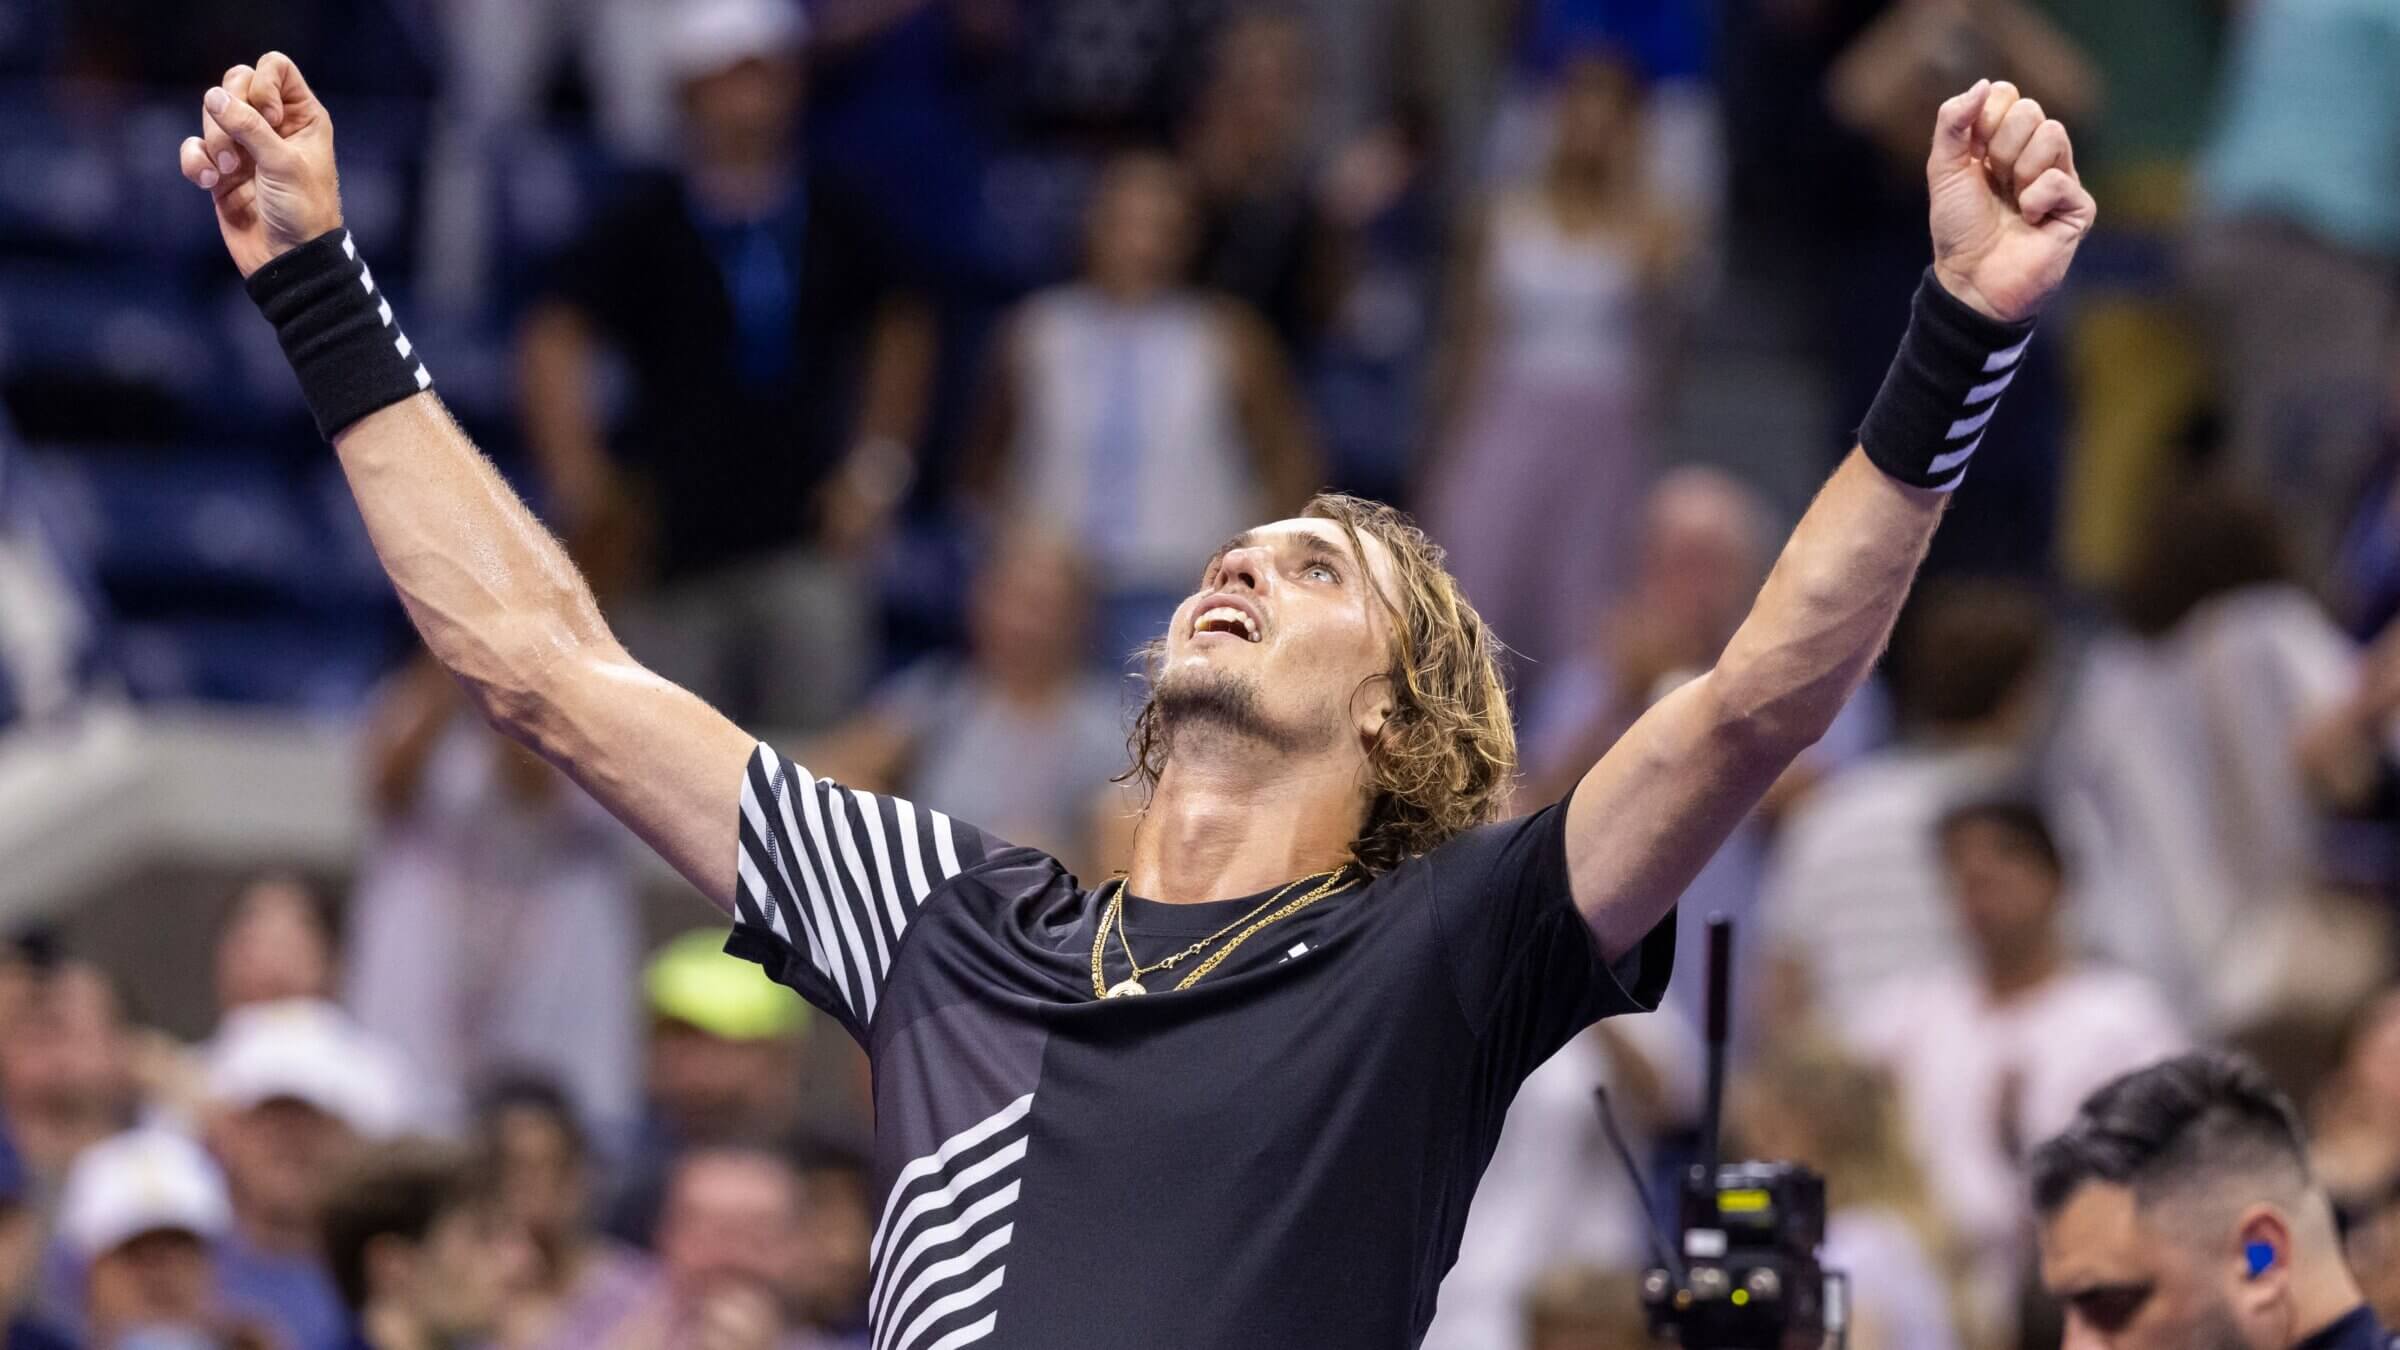 Germany's Alexander Zverev in a more triumphant moment at the U.S. Open.